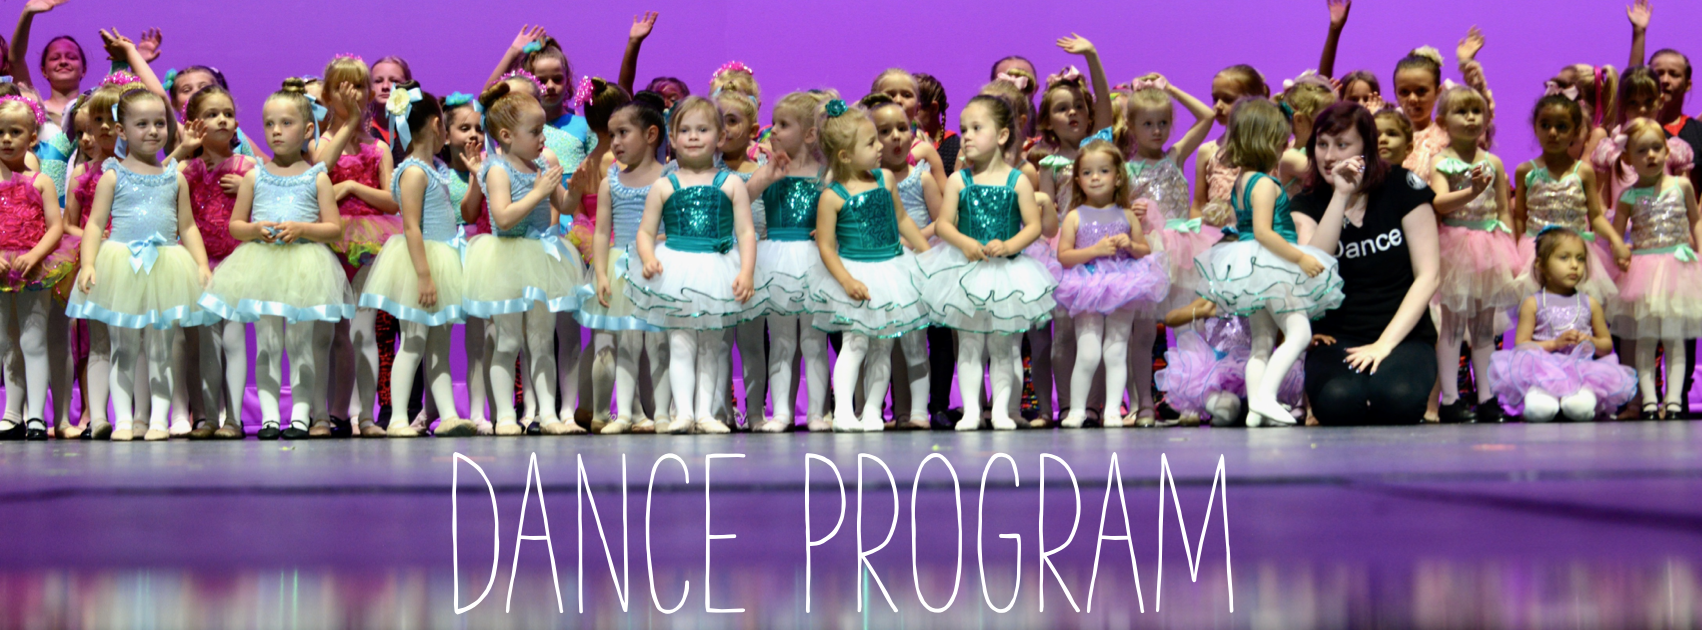 Dane program: Image of large group of young dancers on stage